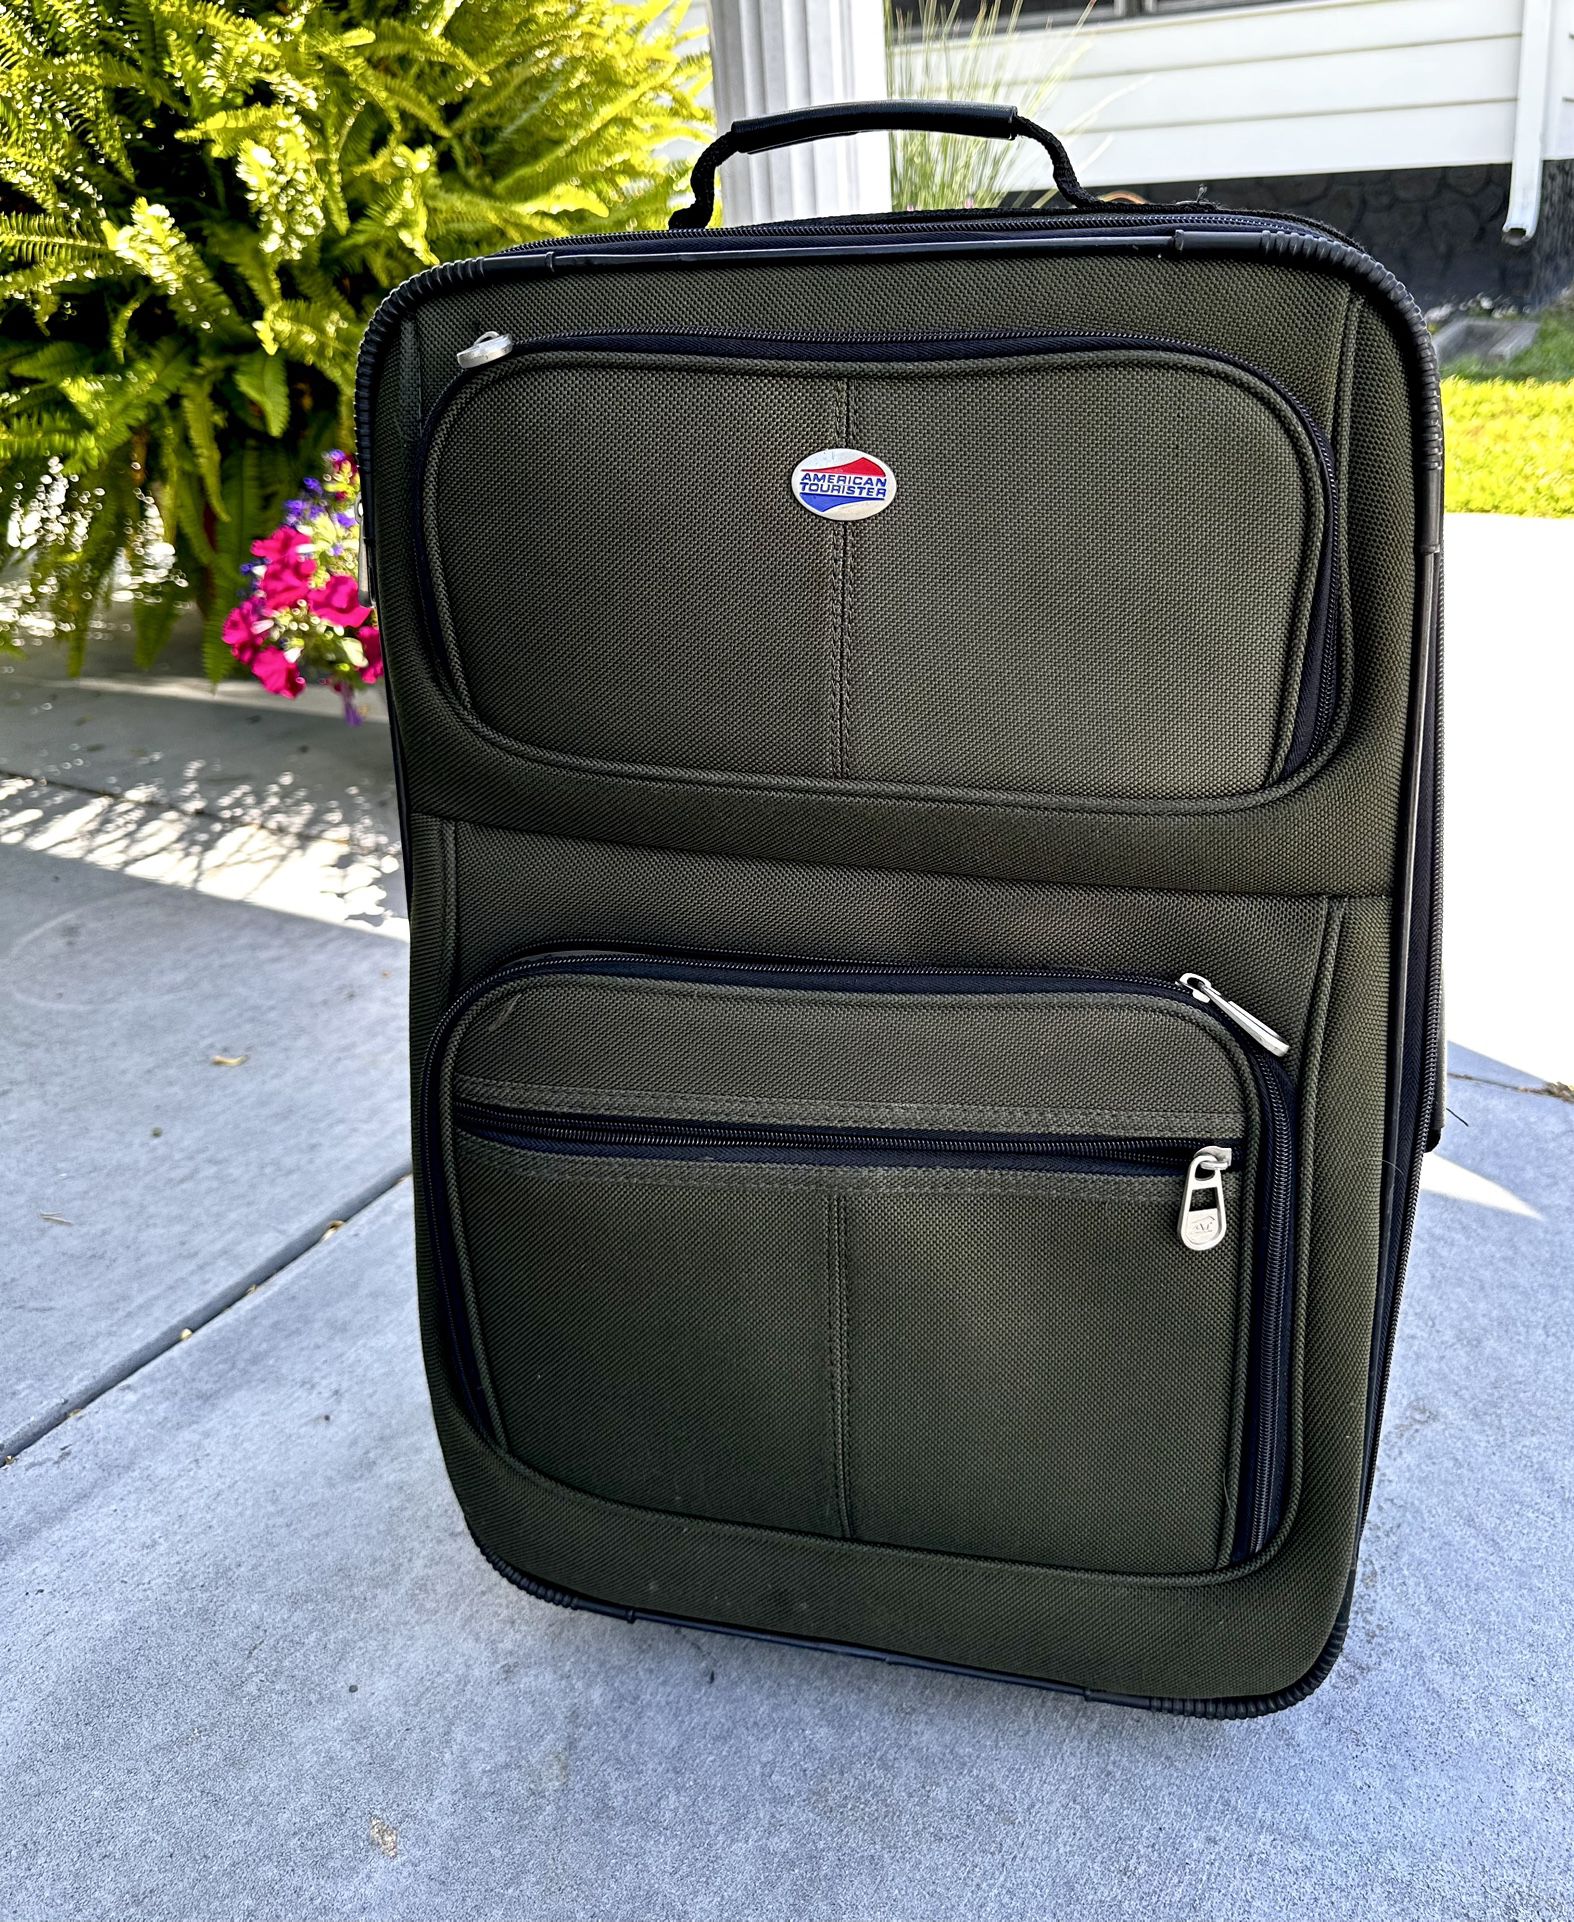 AMERICAN TOURISTER DARK OLIVE GREEN SUITCASE